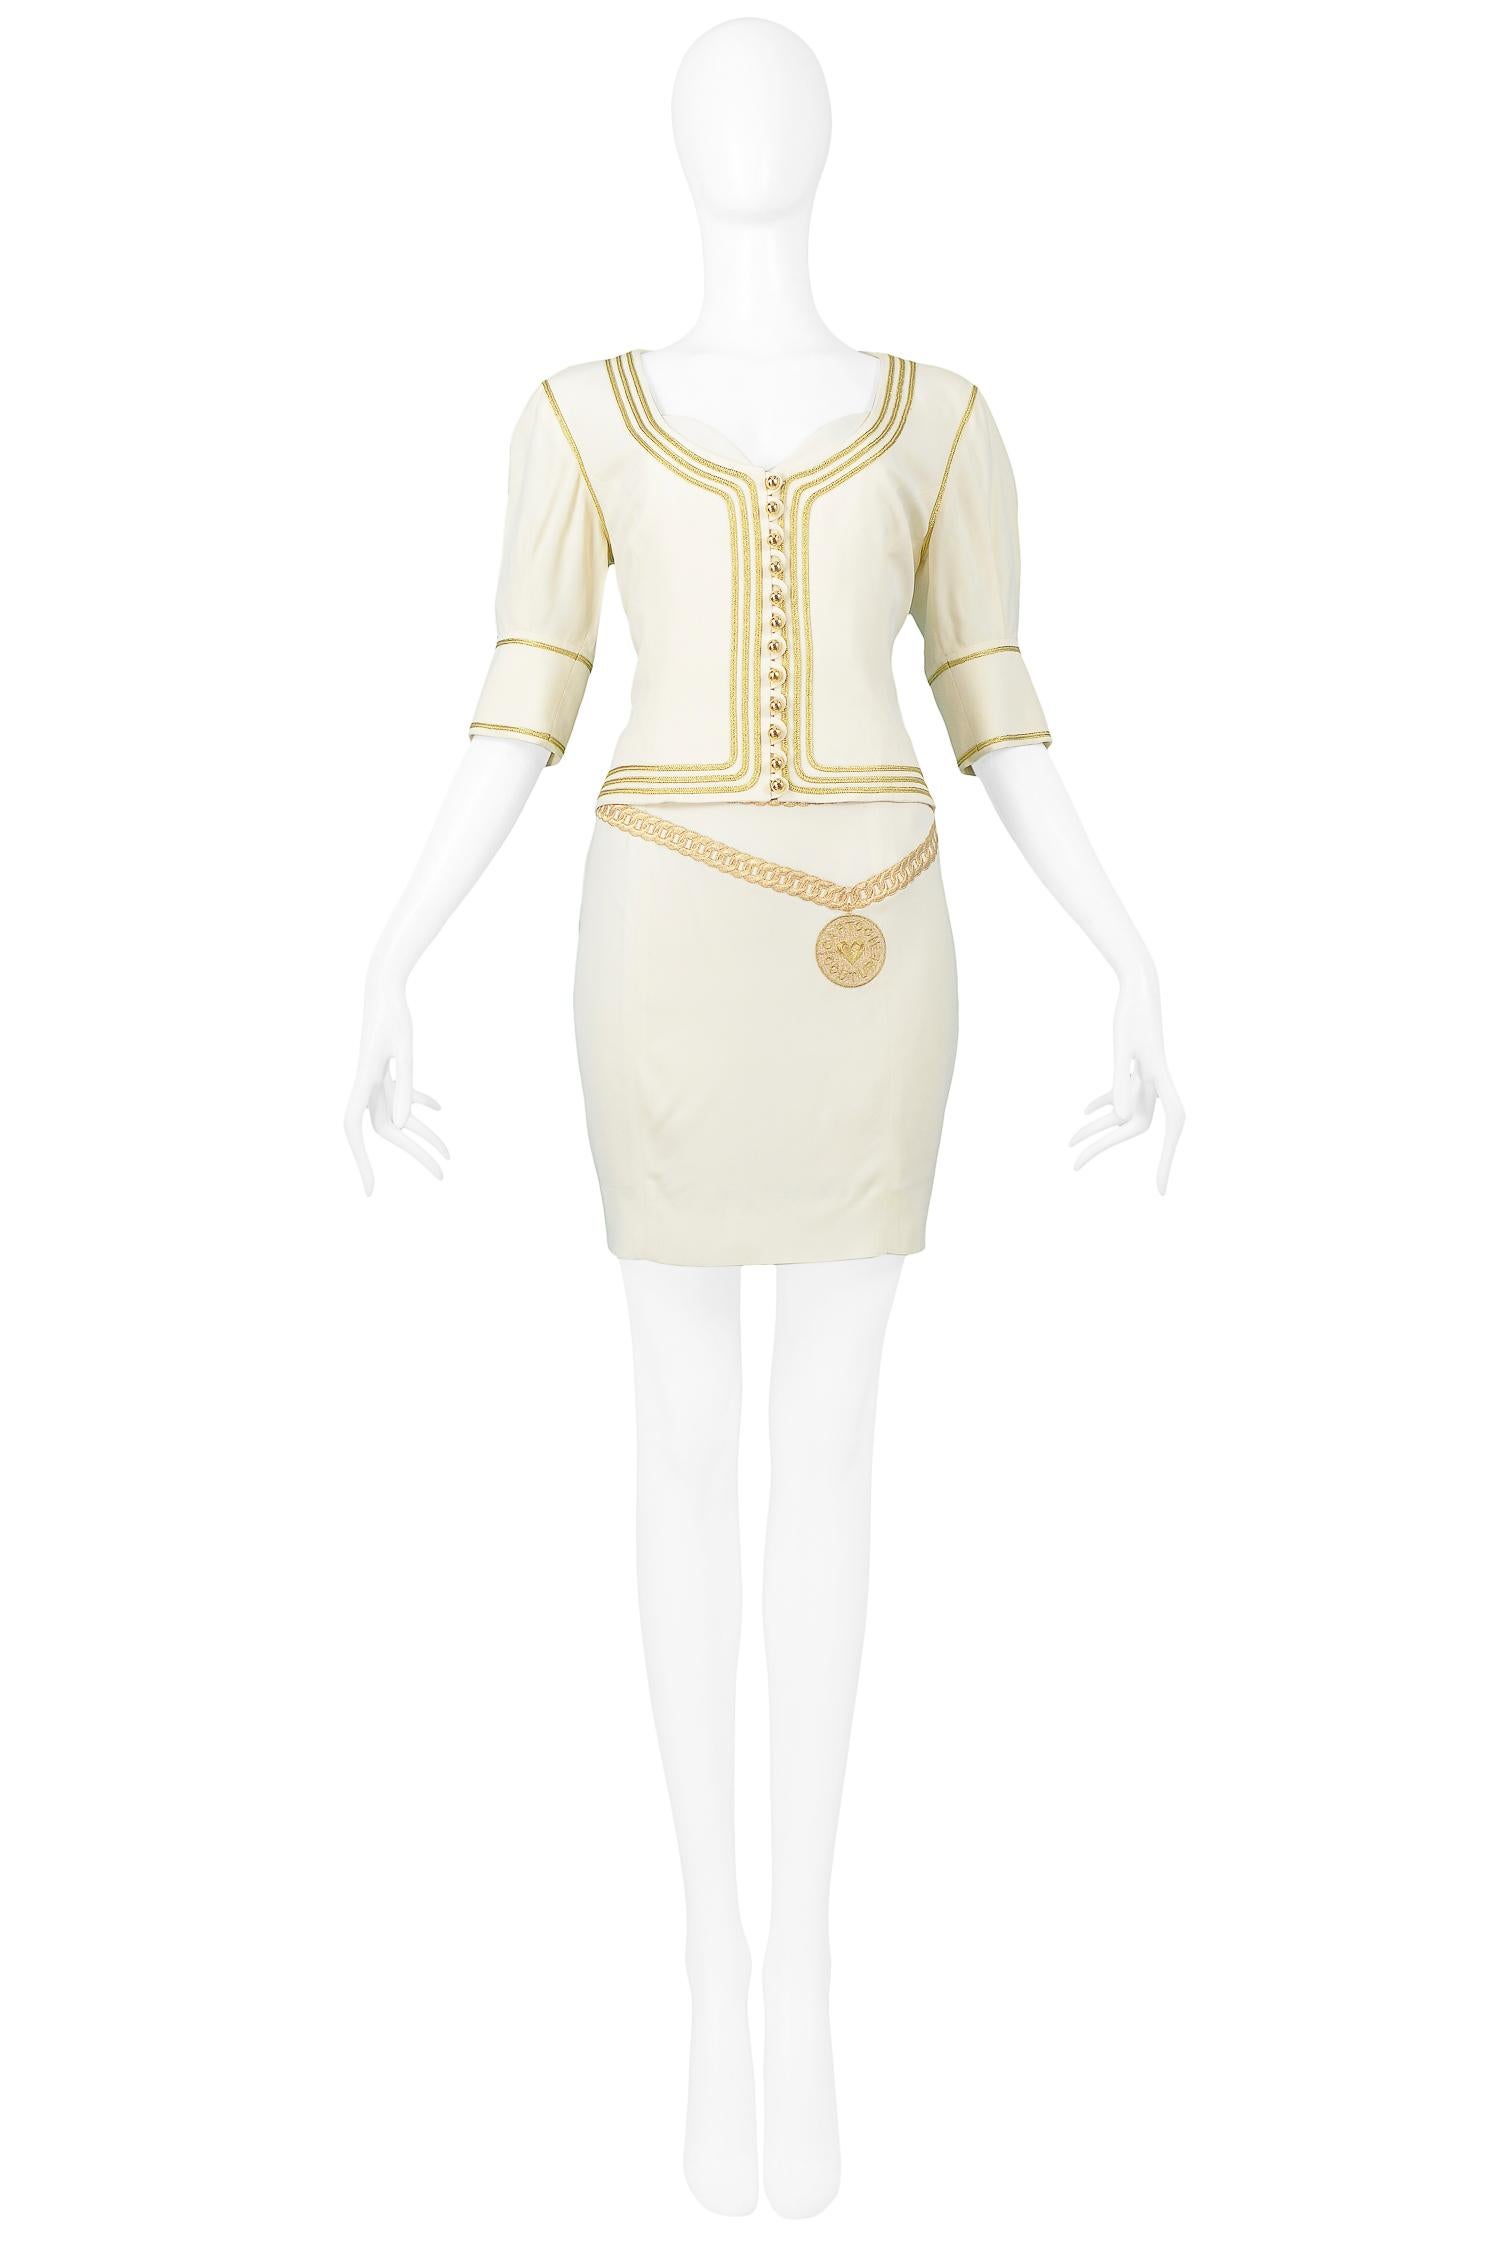 Resurrection Vintage is excited to offer a vintage off-white Moschino Couture by Franco Moschino rayon blend, gold-embroidered dress, and jacket ensemble. The jacket features gold buttons at the center front opening, elbow-length sleeves, and gold